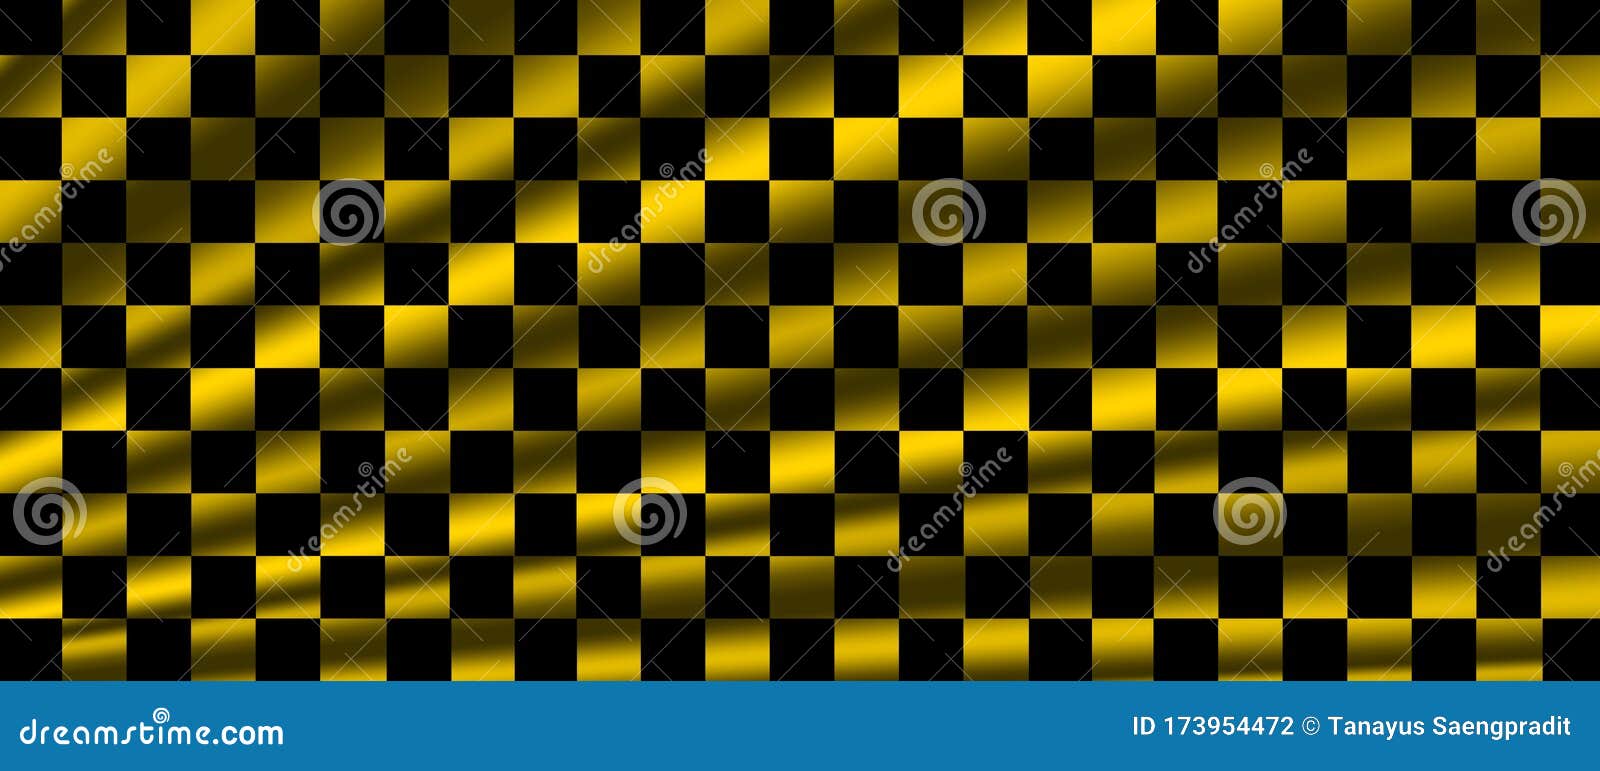 Yellow And Black Checkered Flag For Racing Background And Texture Stock